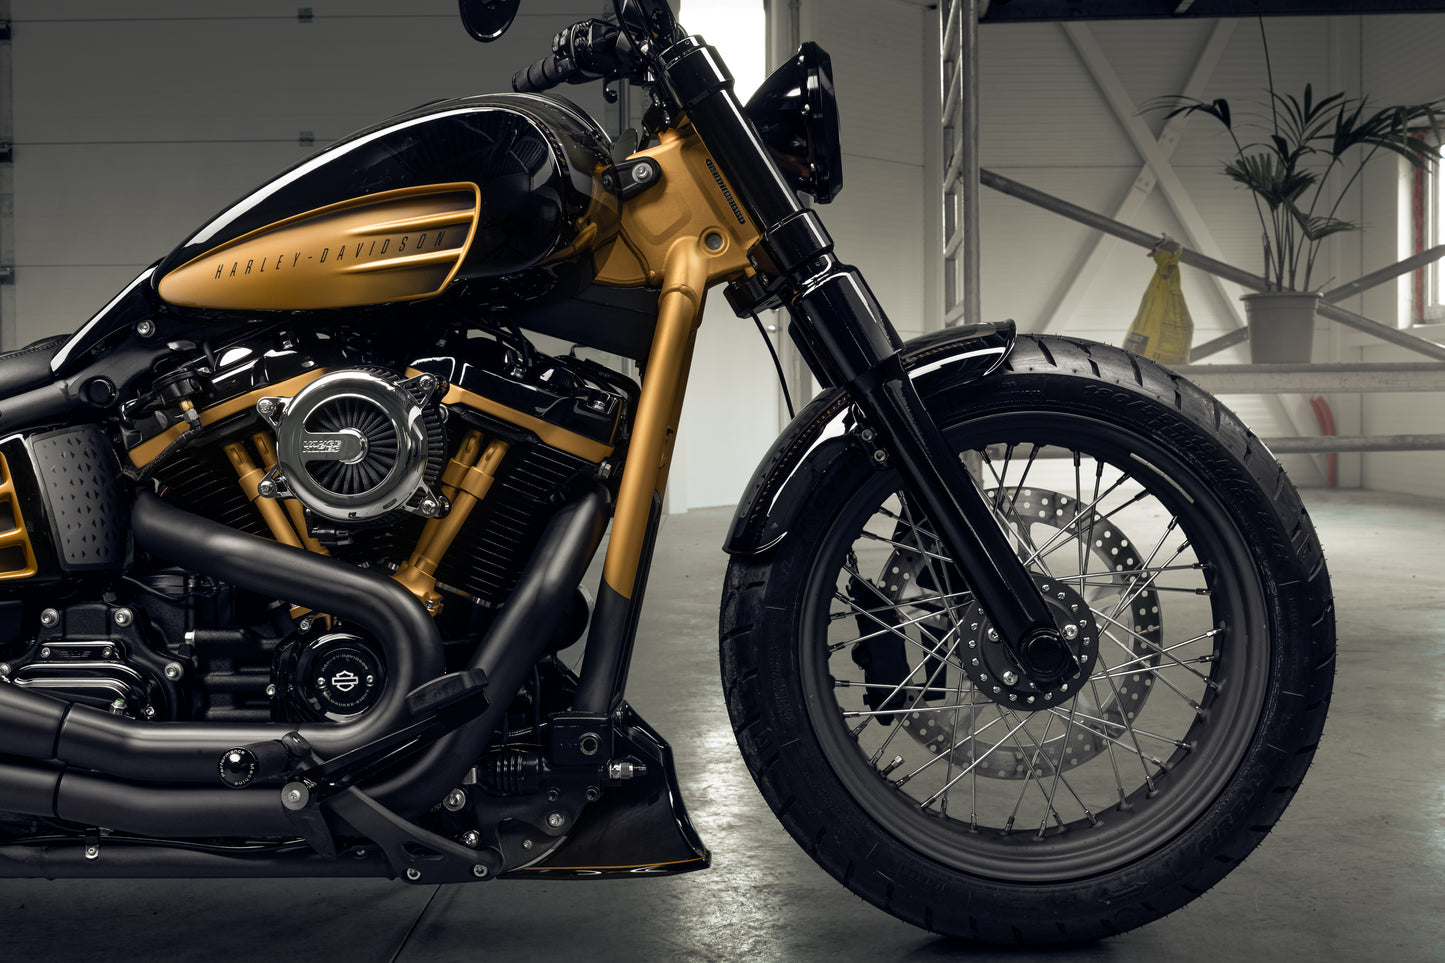 Harley Davidson motorcycle with Killer Custom wide triple trees set from the side in a spacious and modern garage